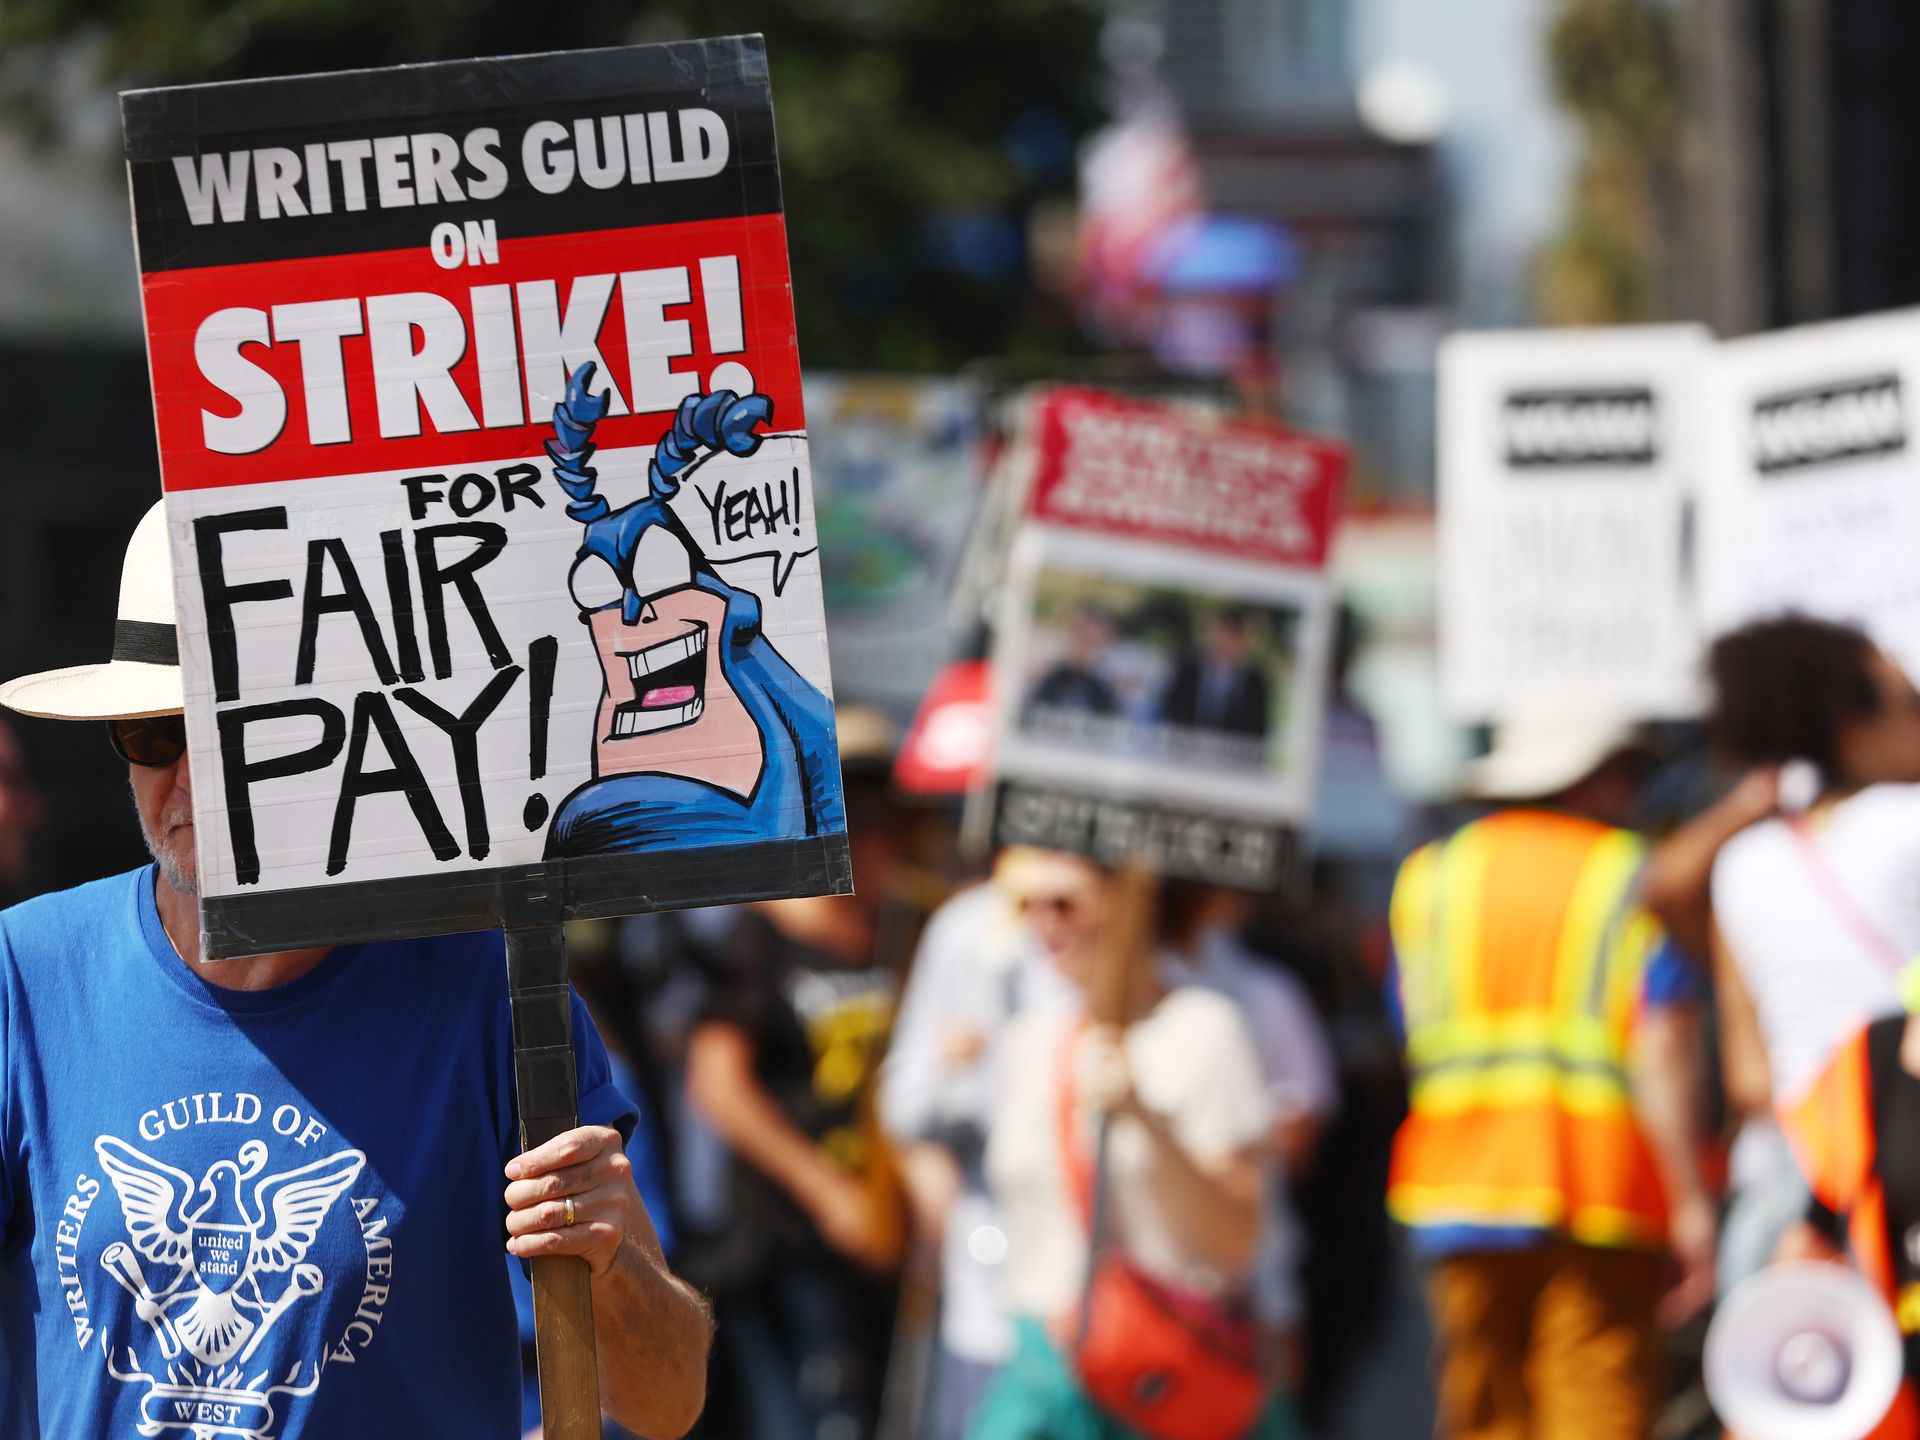 Hollywood writers vote to approve contract deal that ended strike